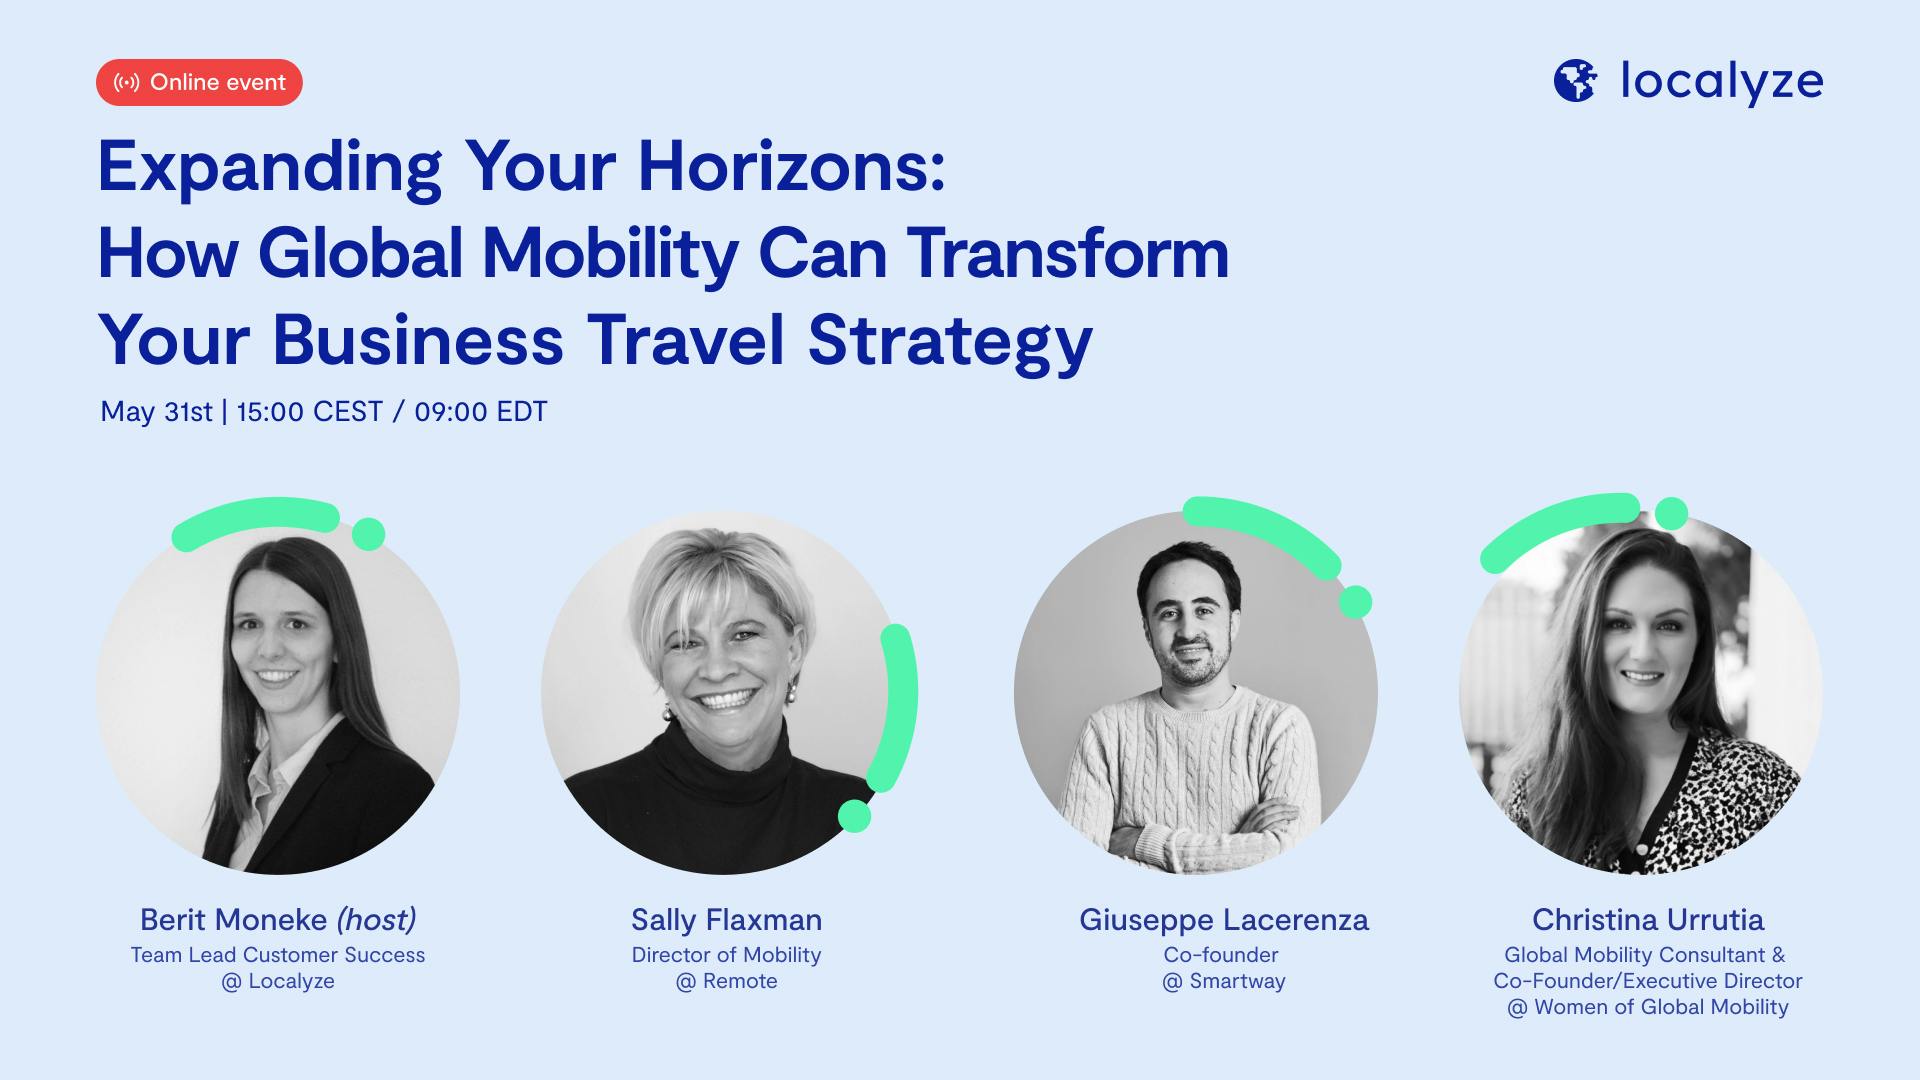 Rewatch Global Mobility Transforming Business Travel Strategy